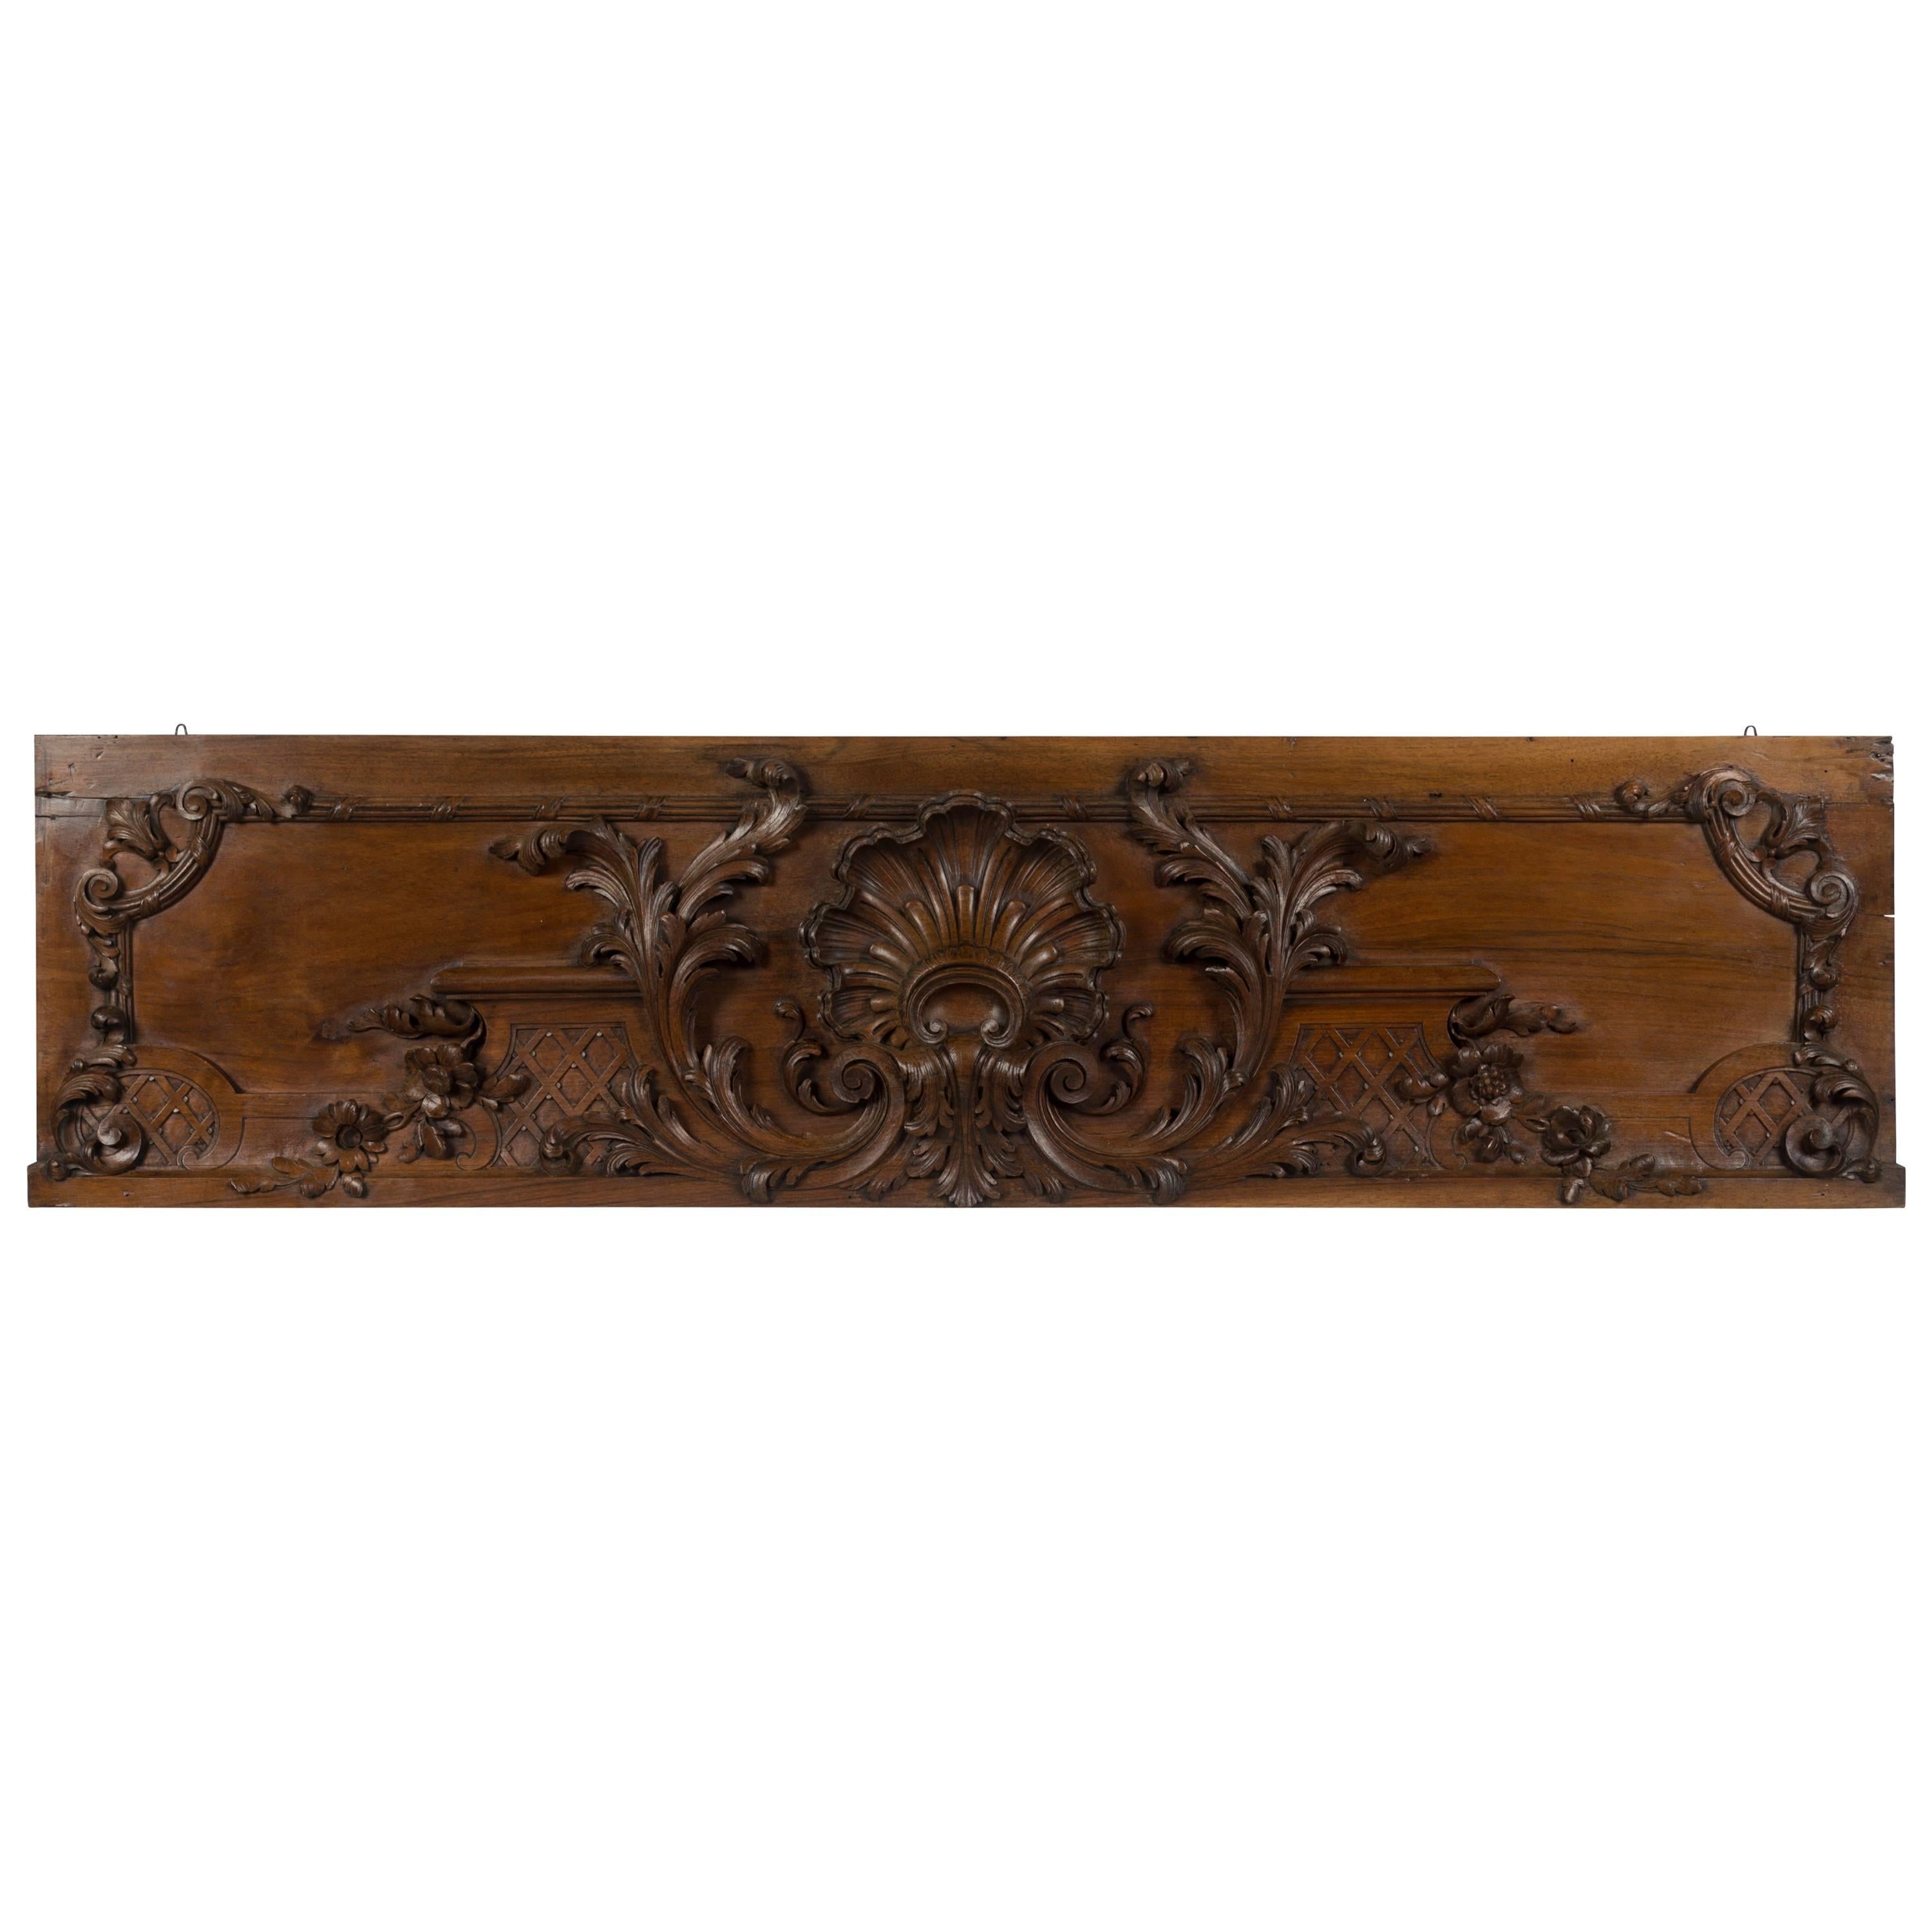 19th Century French Carved Walnut Architectural Panel